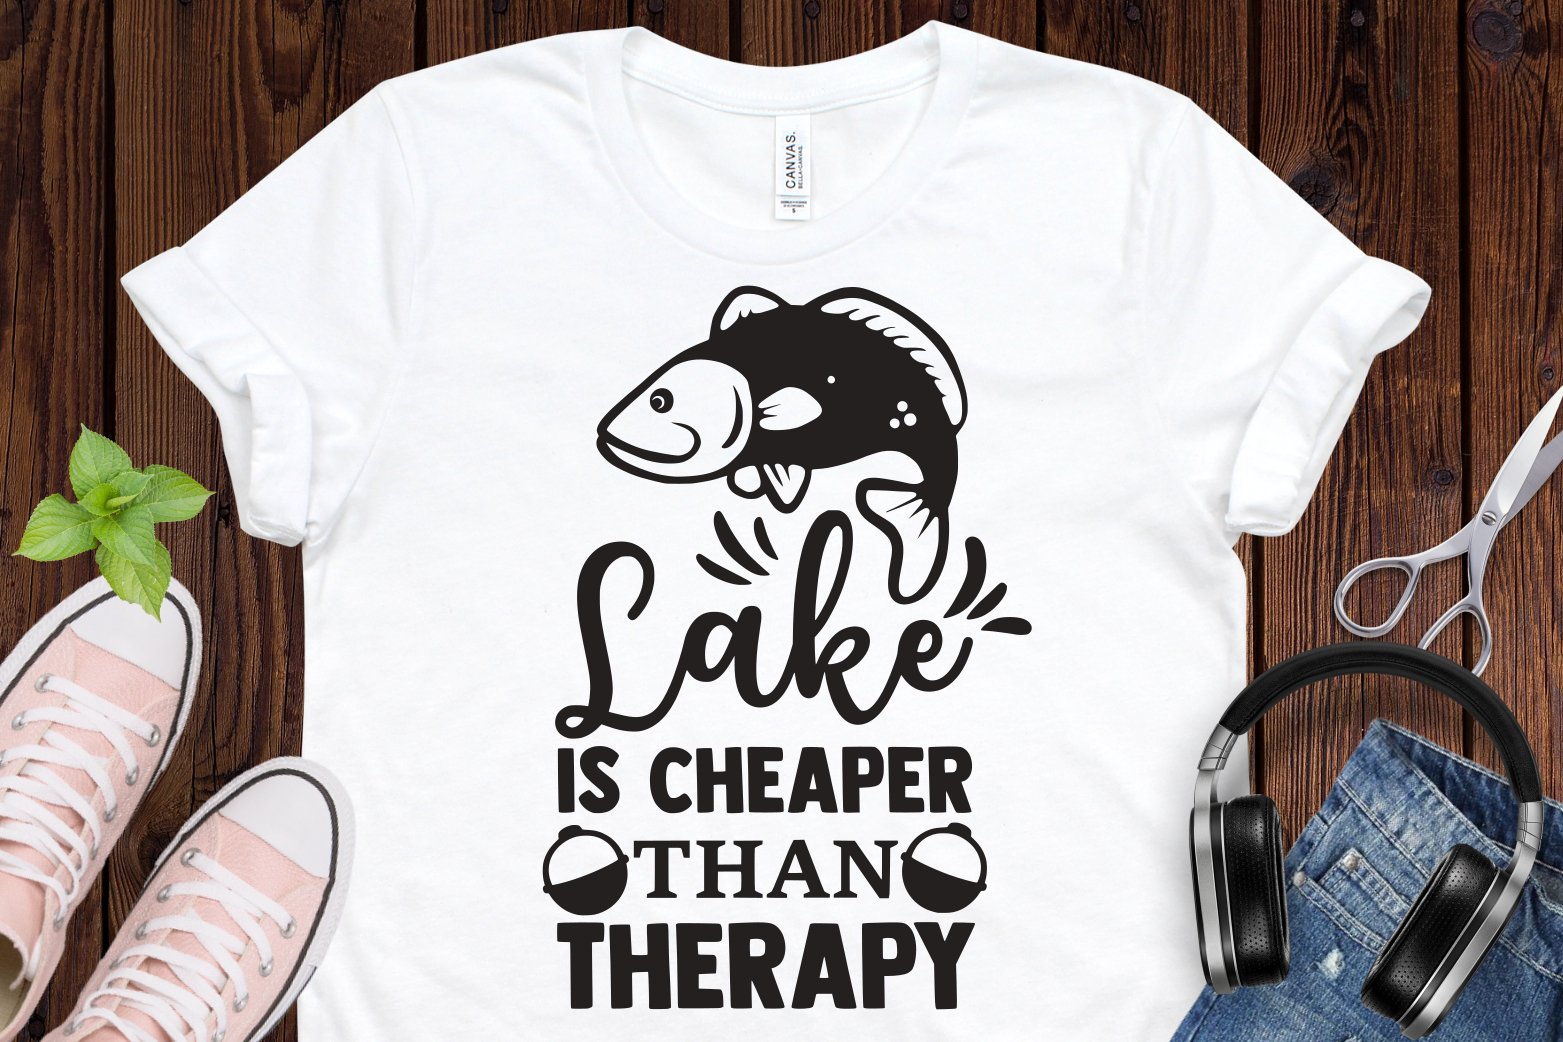 Lake is cheaper than therapy.